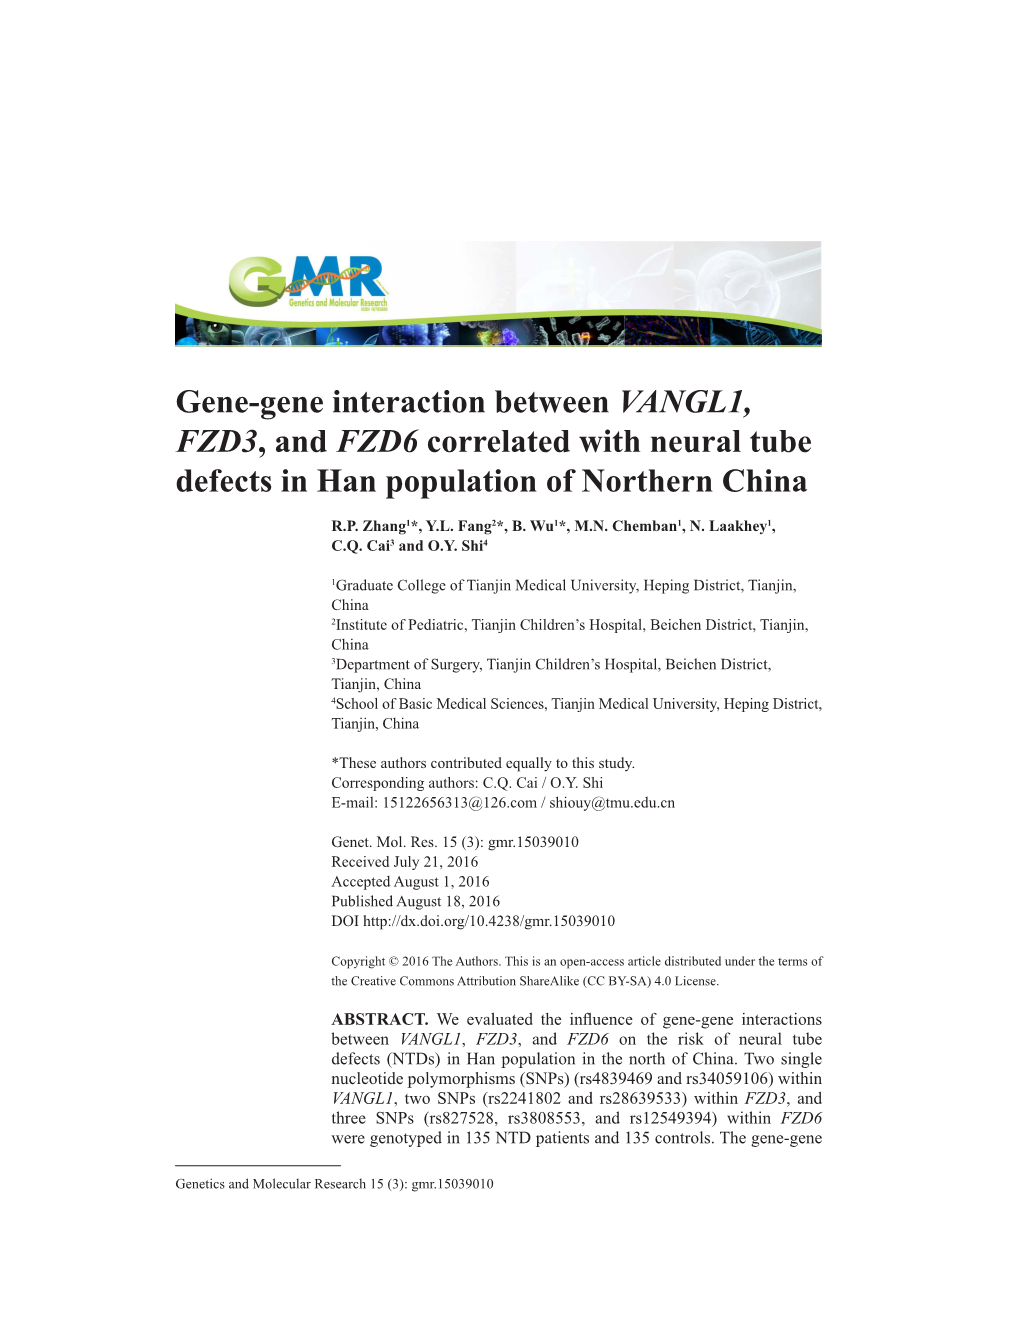 Gene-Gene Interaction Between VANGL1, FZD3, and FZD6 Correlated with Neural Tube Defects in Han Population of Northern China